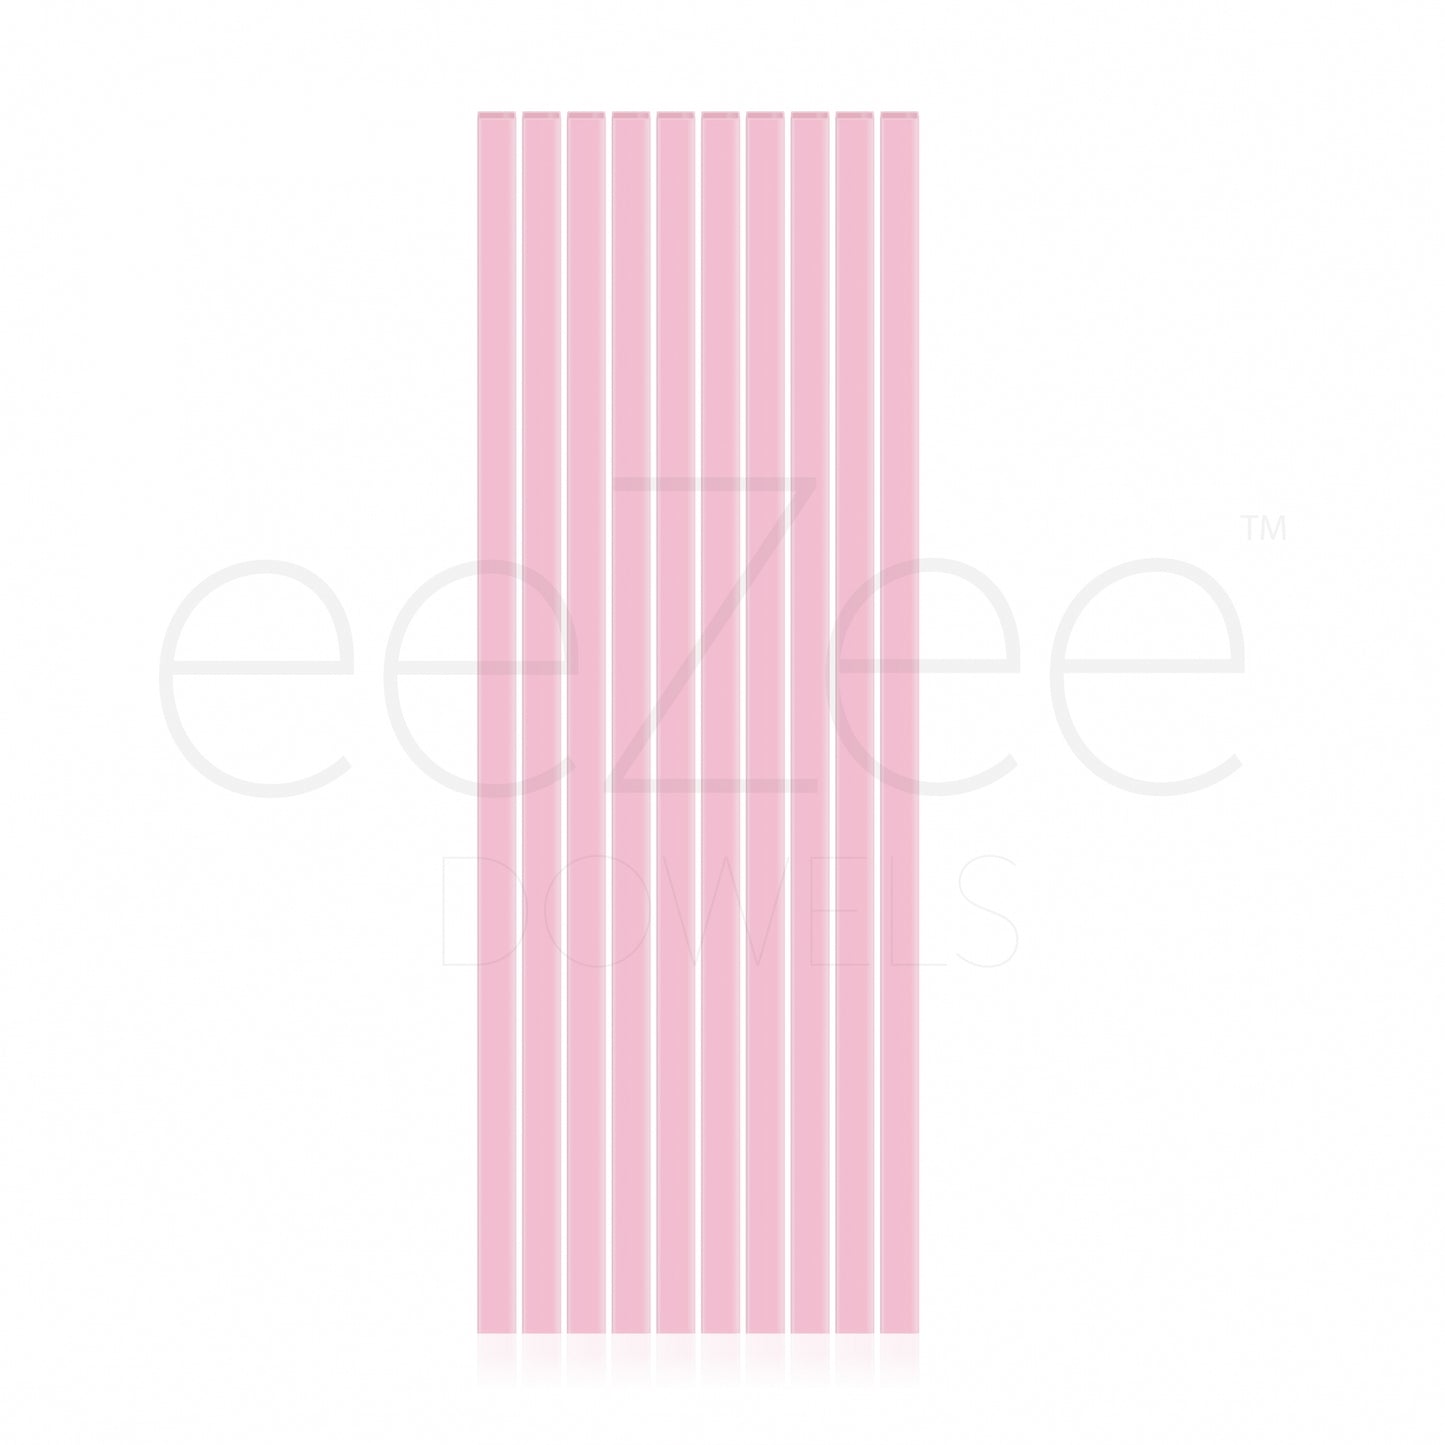 12" Pink Square Dowels - Pack of 4